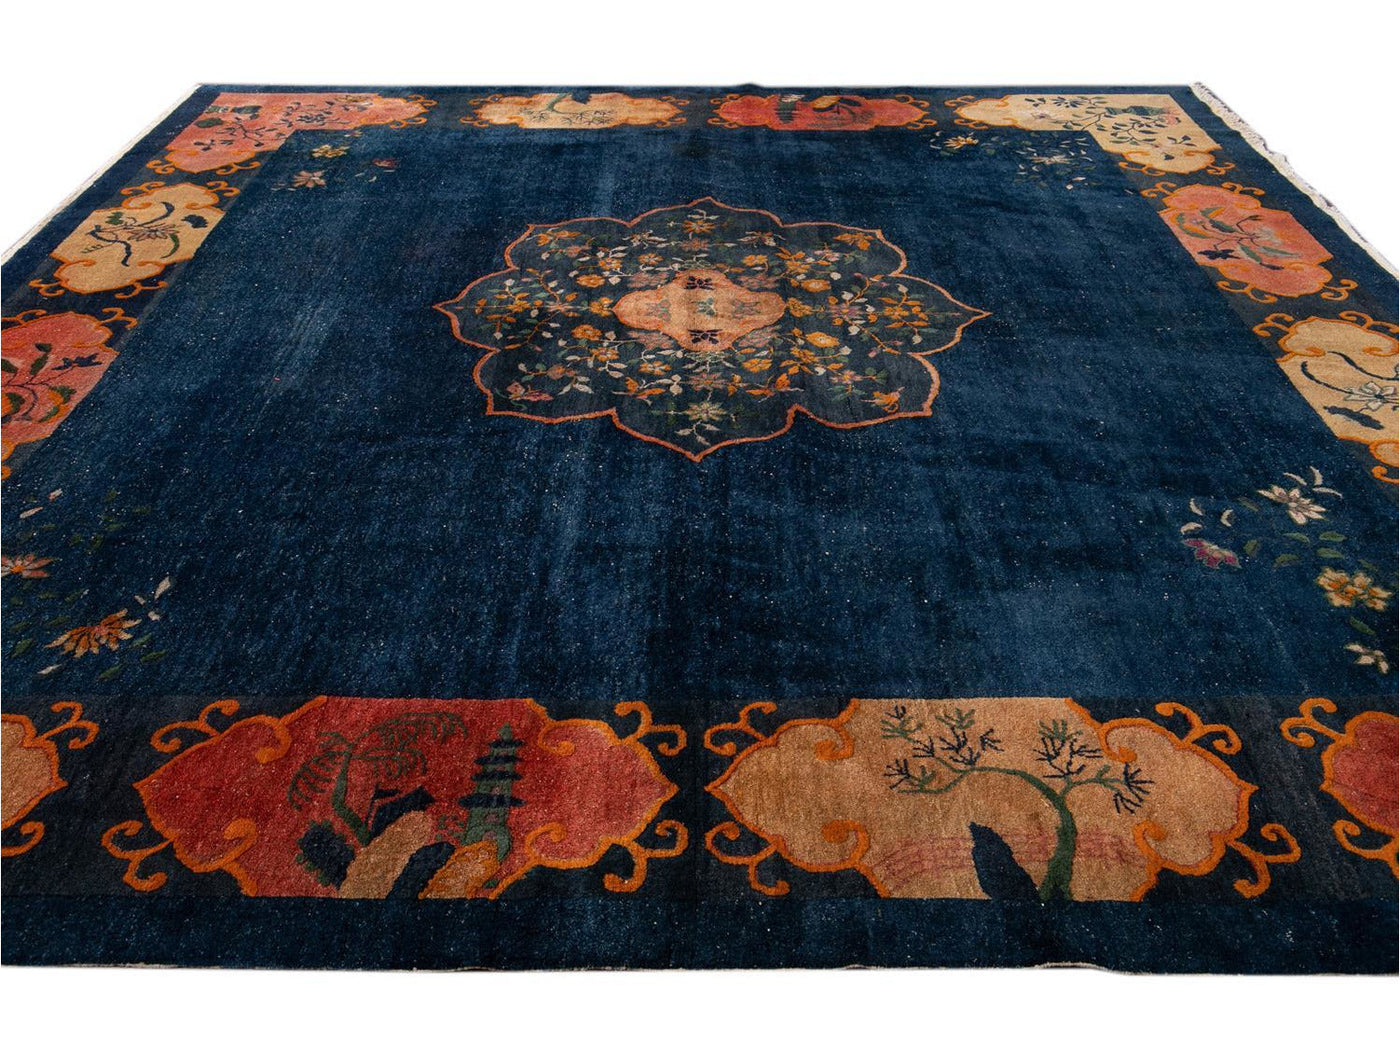 Antique Art Deco Chinese wool Rug 12 X 13